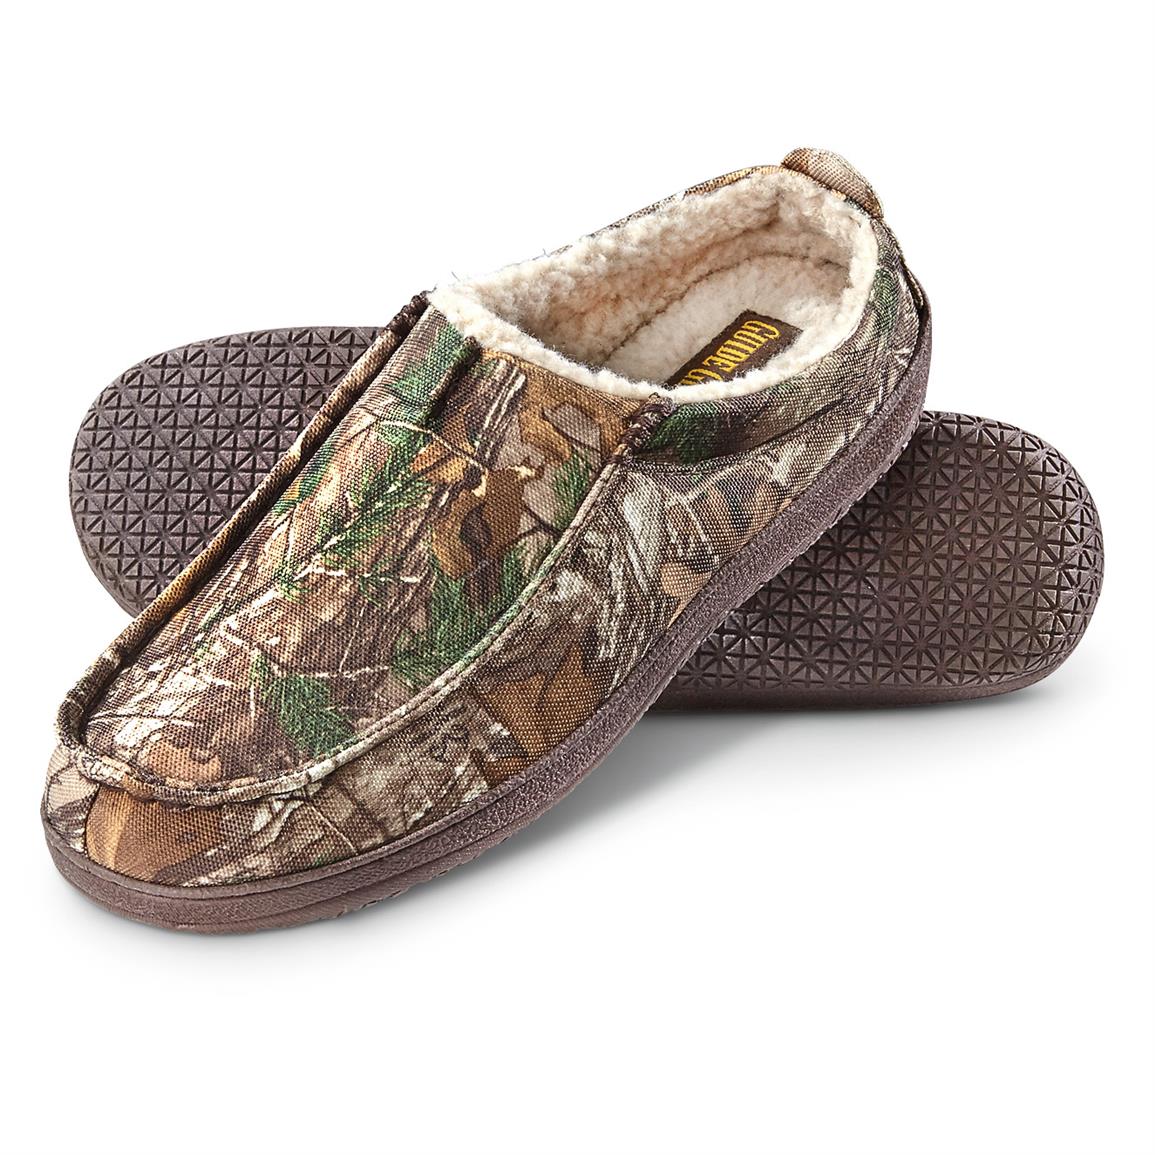 mens camo moccasin slippers